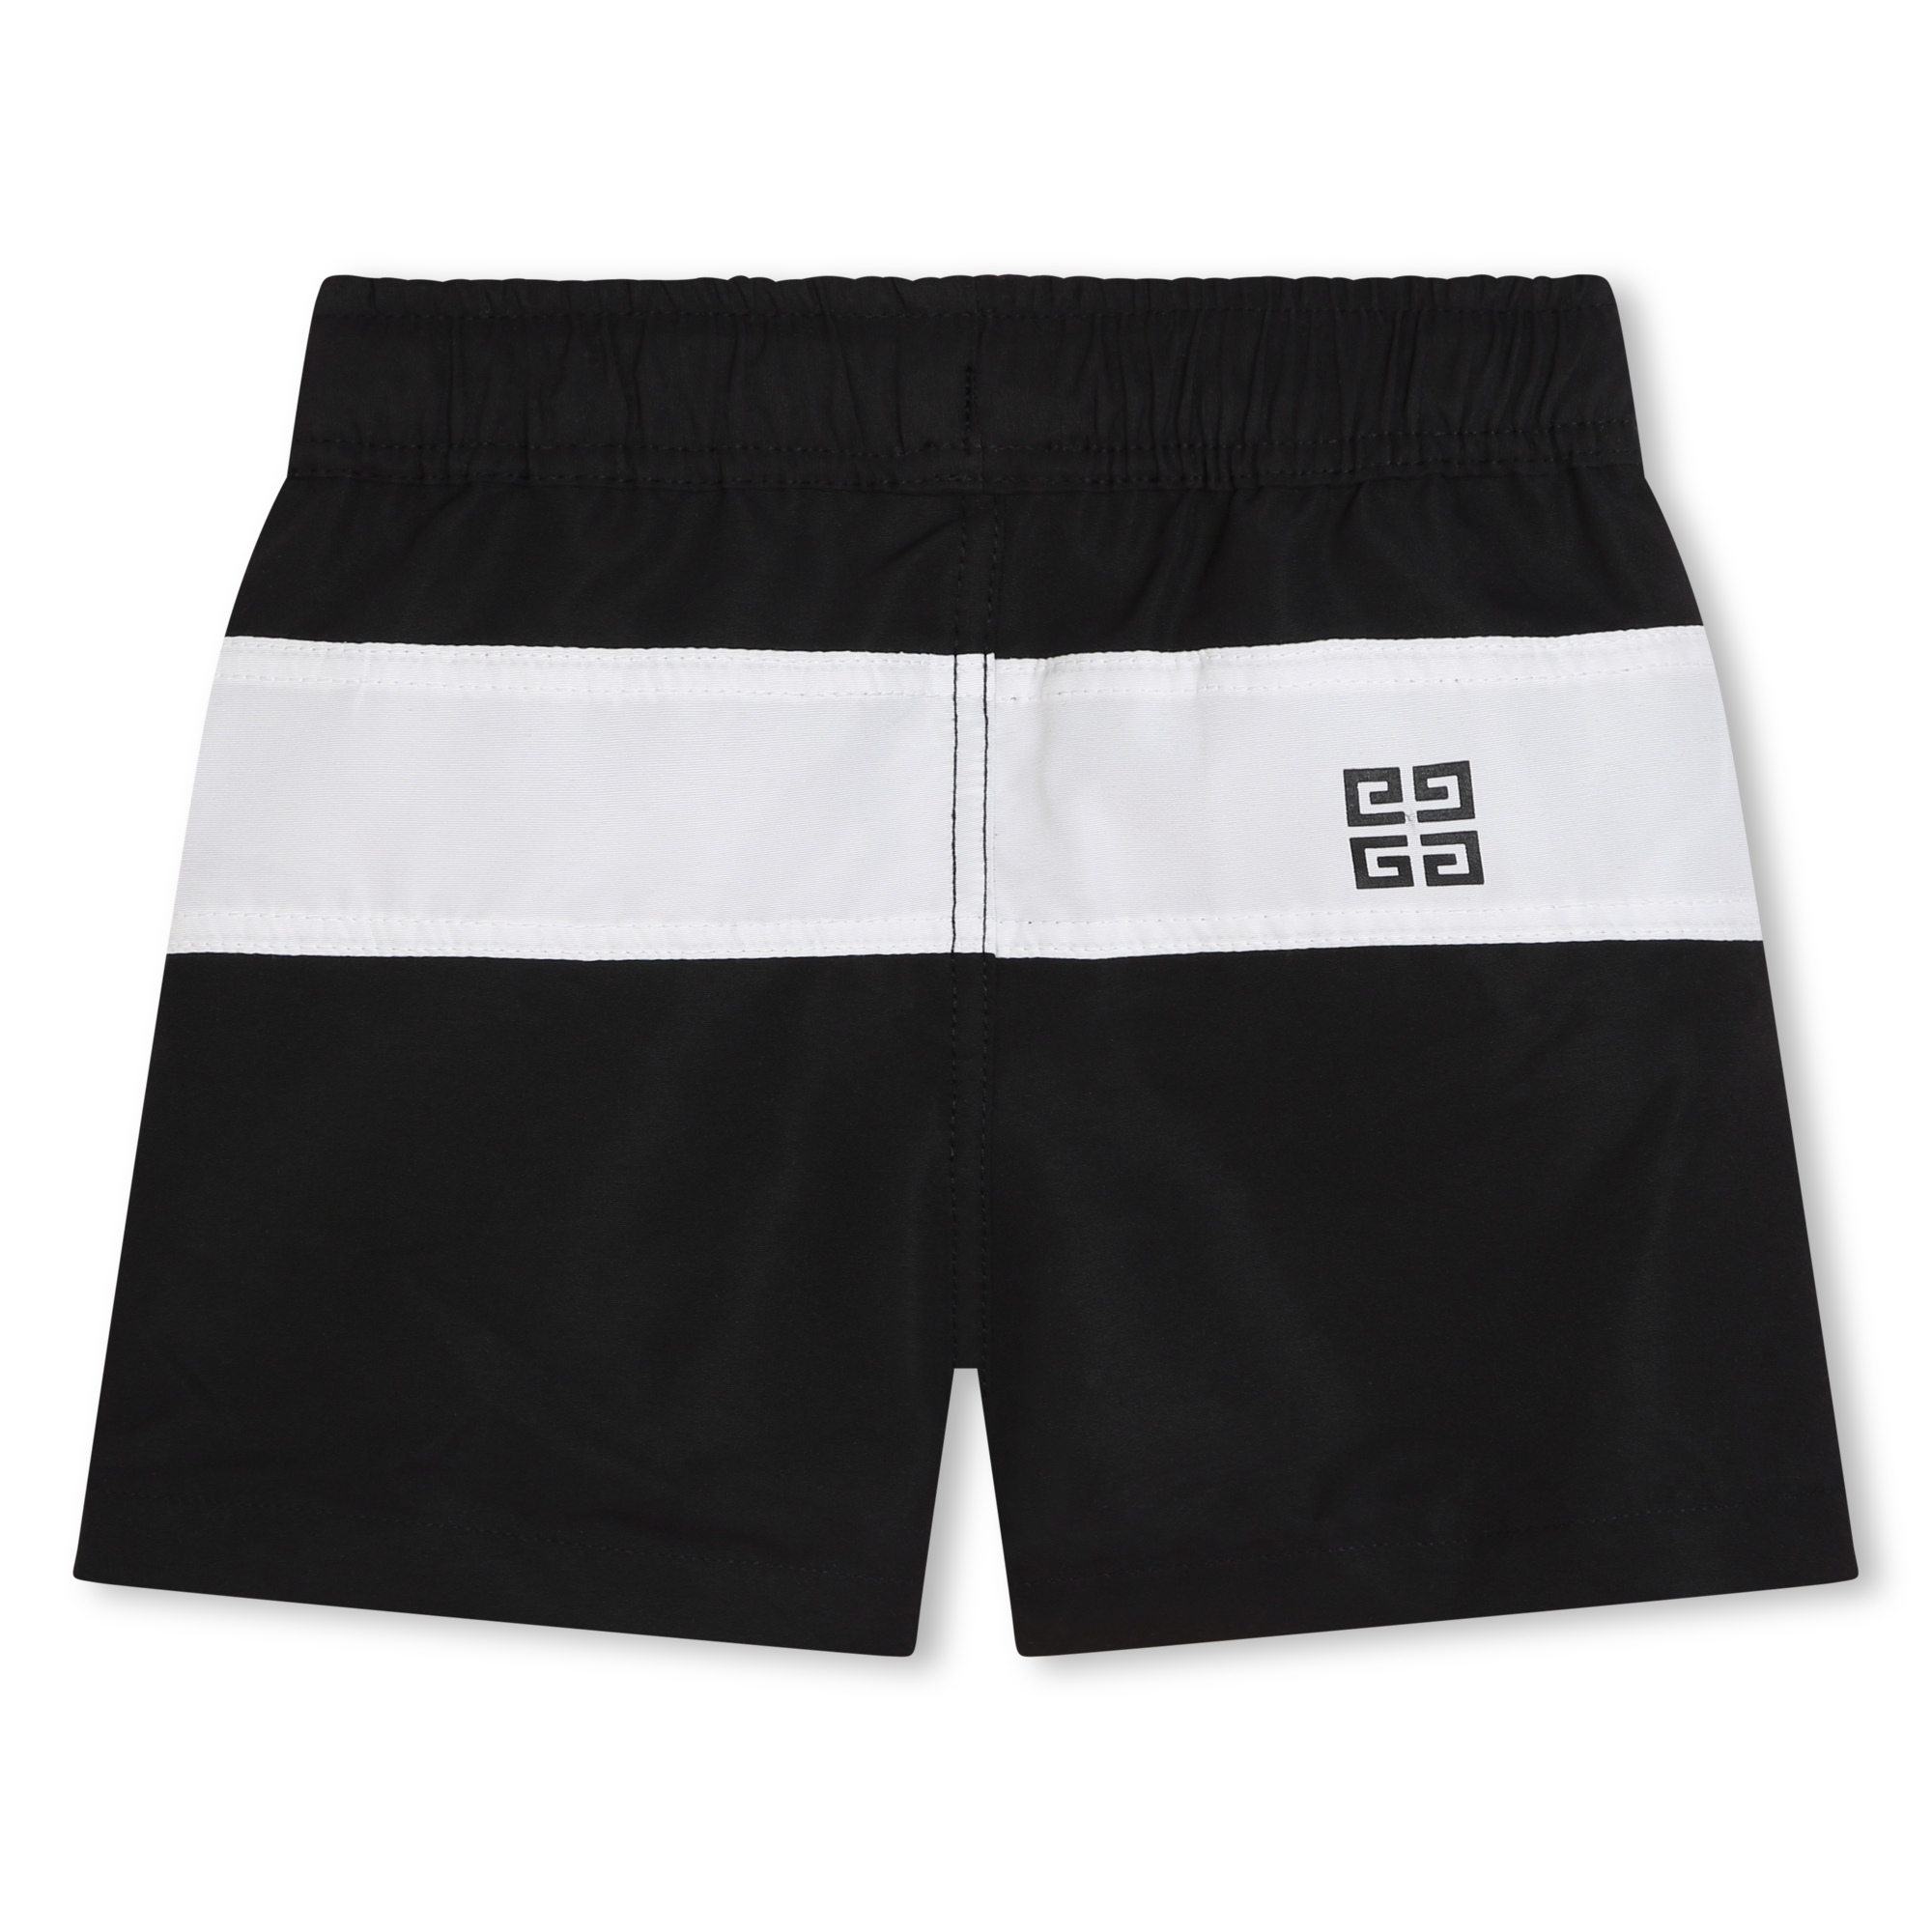 Swimming trunks GIVENCHY for BOY